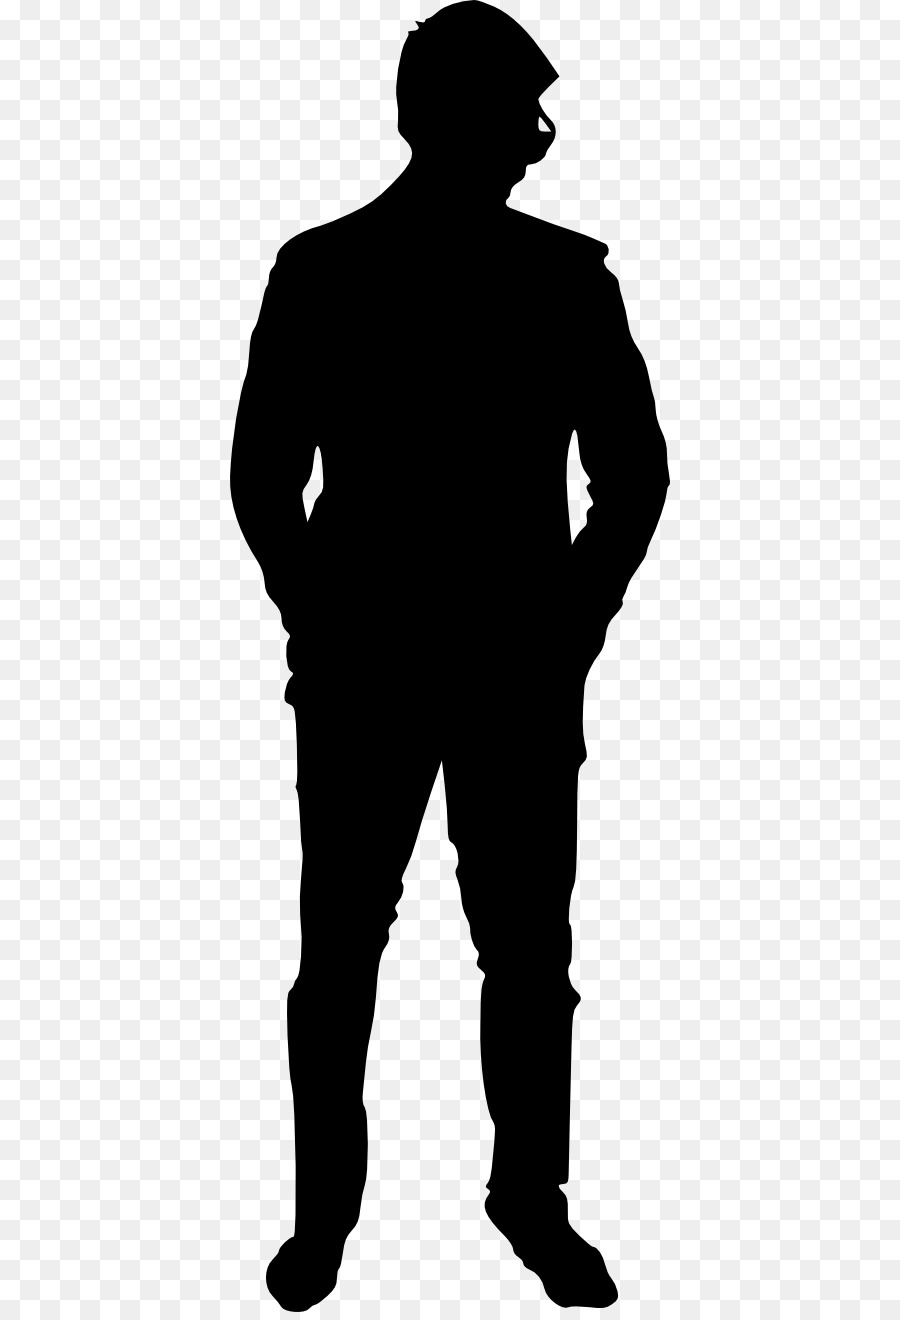 Silhouette Person Male - Silhouette png download - 440*1312 - Free Transparent Silhouette png Download.